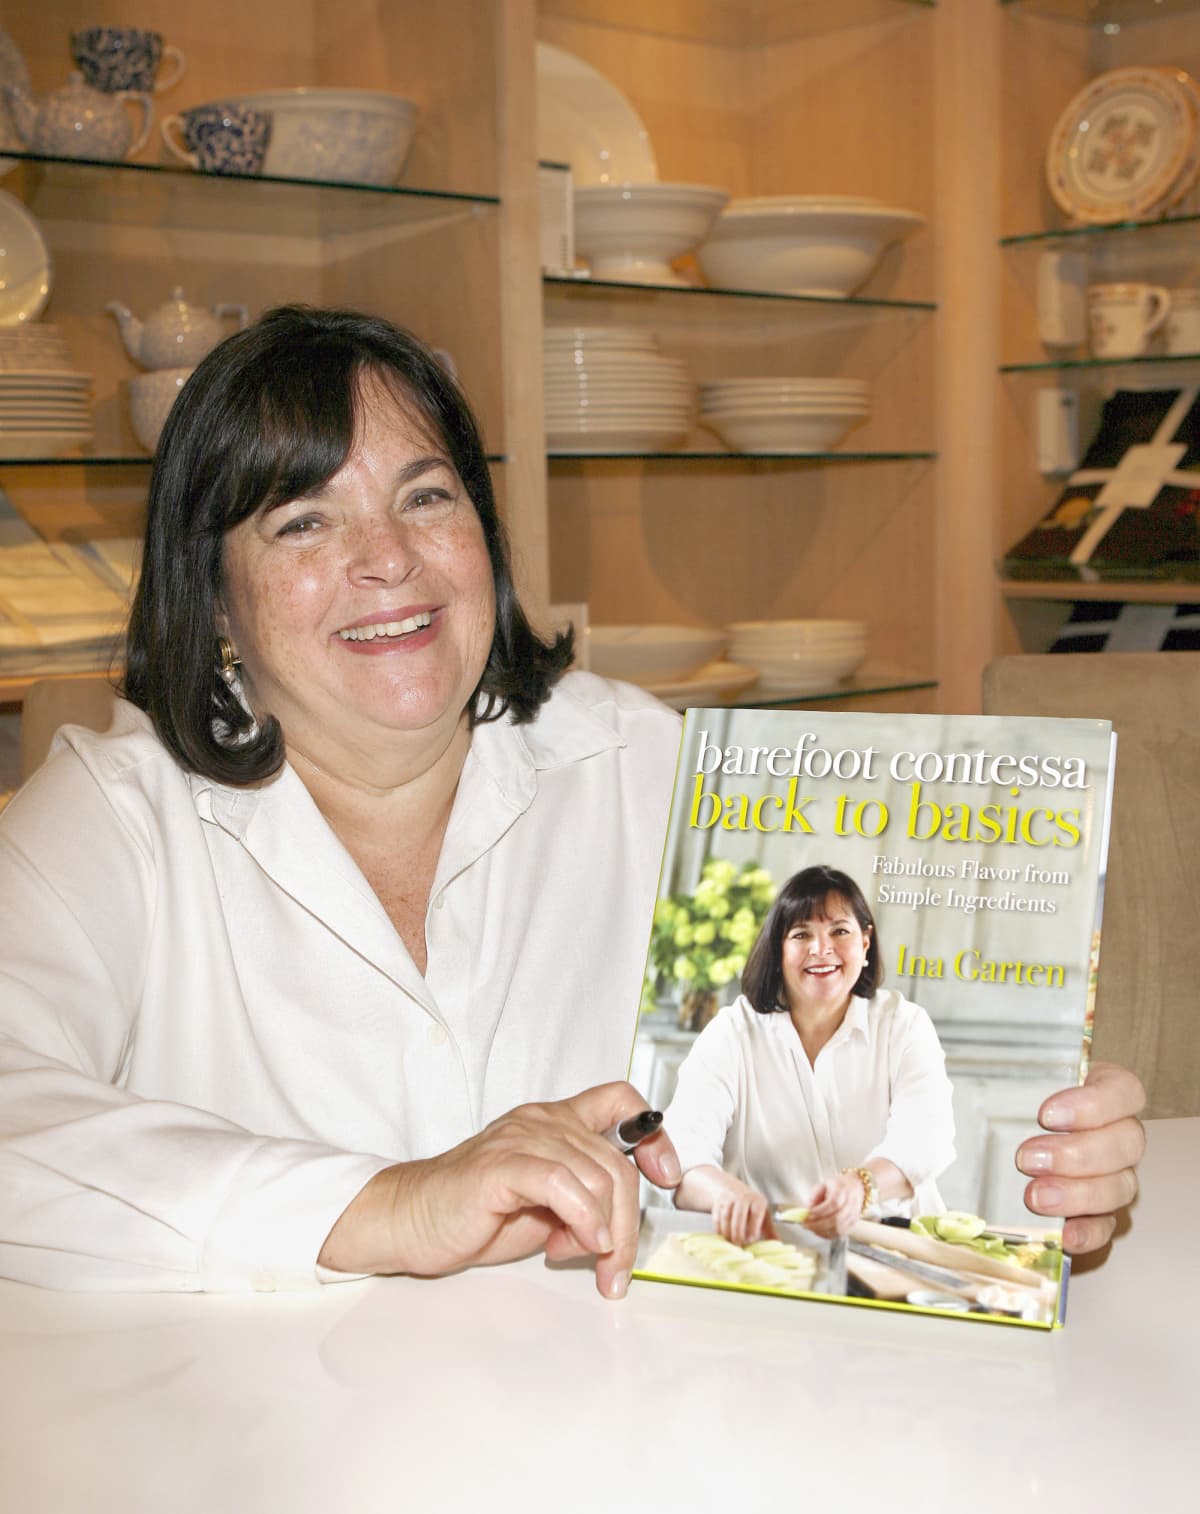 Chef Ina Garten wearing black and smiling